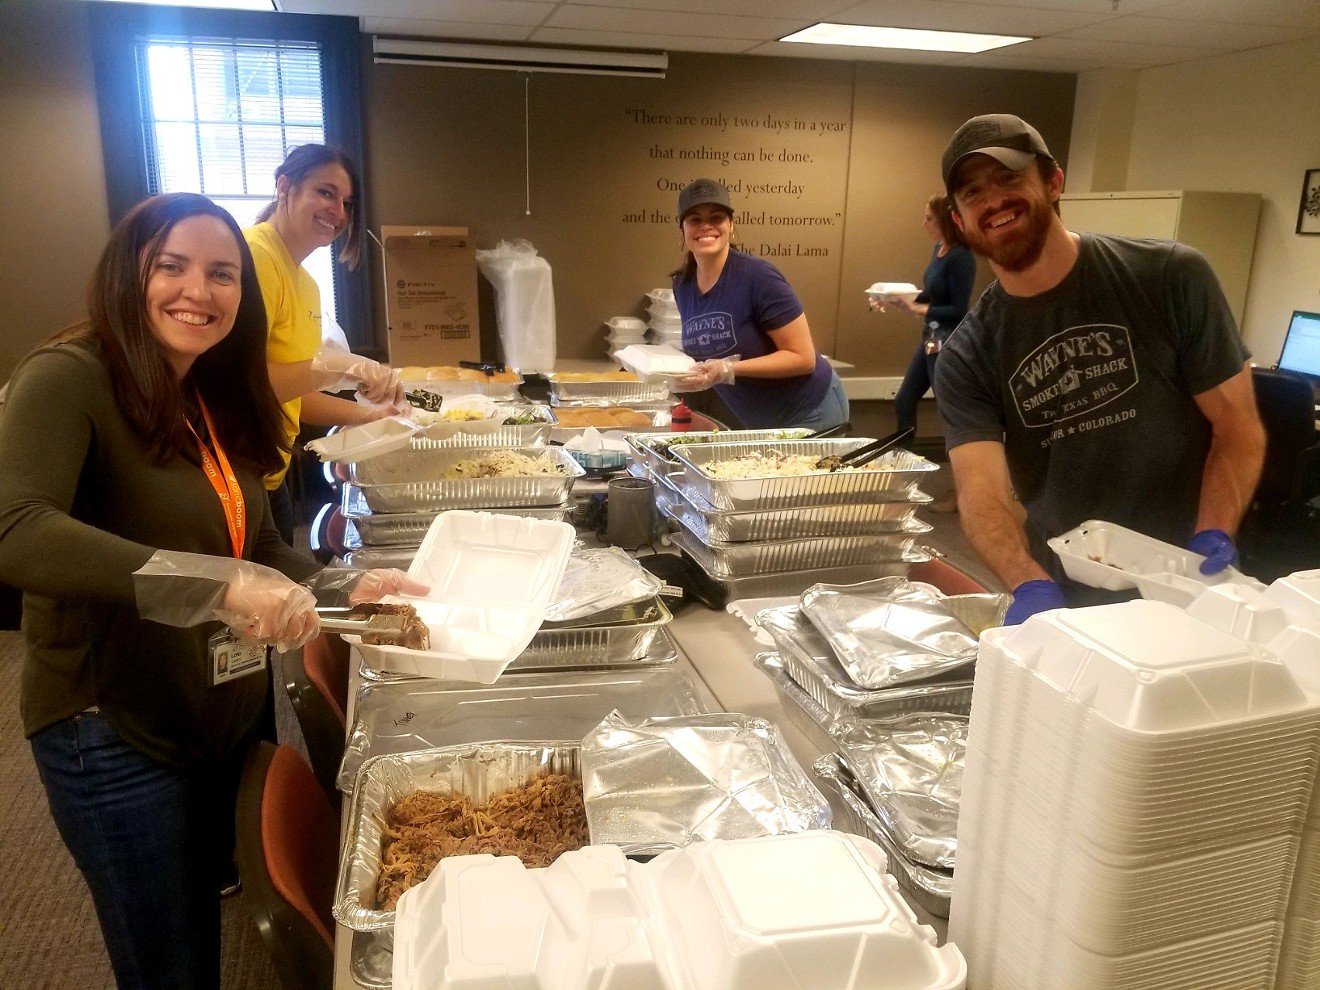 Wayne's Smoke Shack employees box up food for National Jewish Health in Denver.